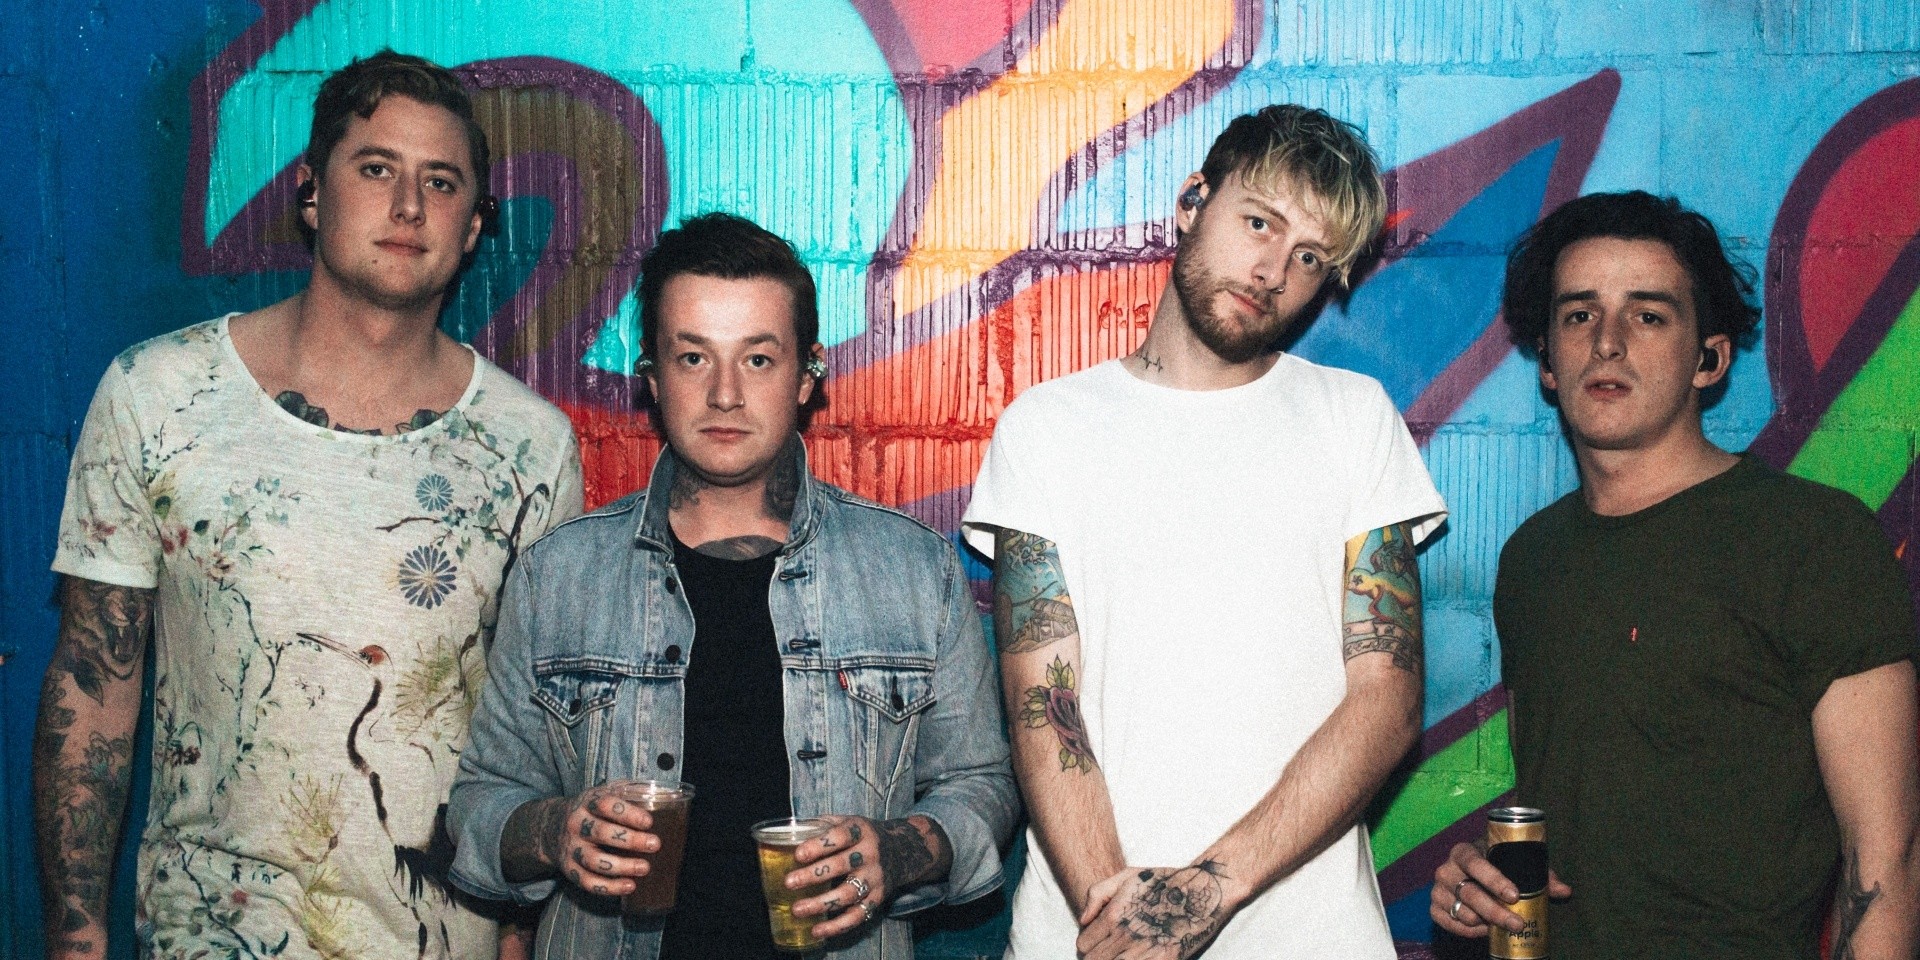 Deaf Havana to tour Asia in August, stops include Japan, Korea, Singapore, and Thailand